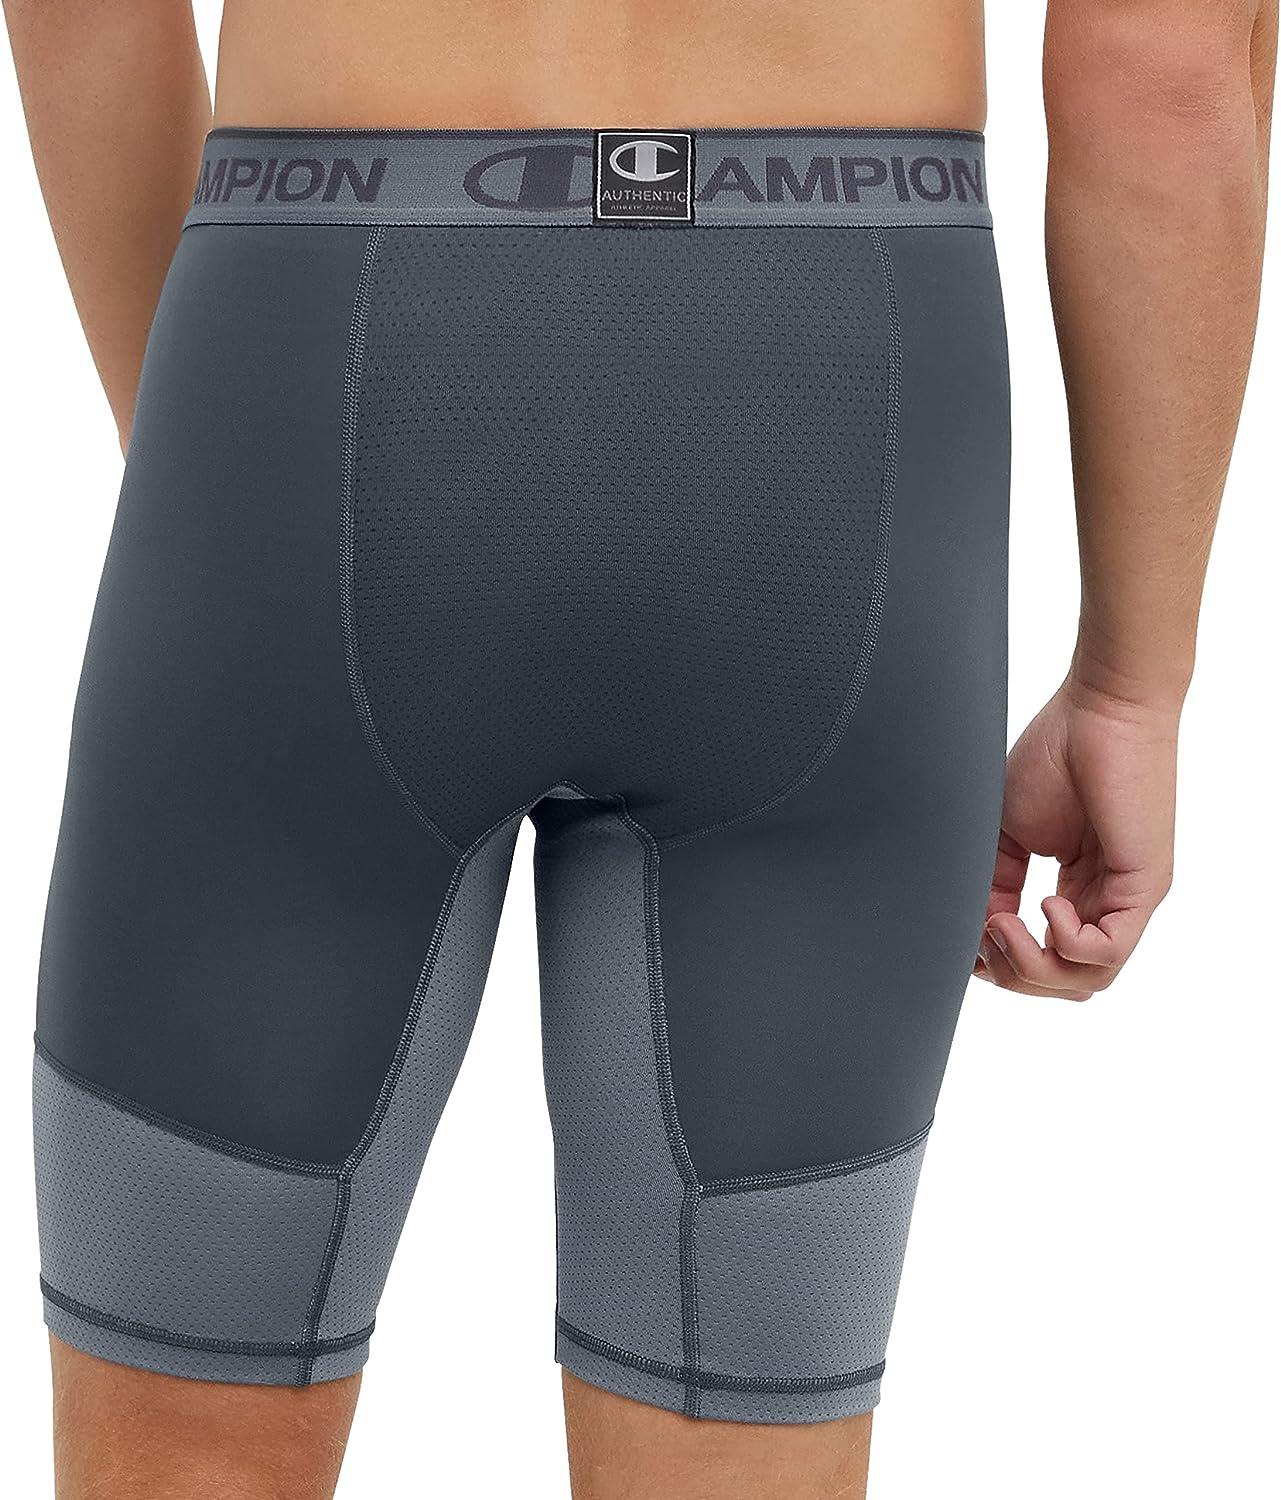  CHAMPION Sports Brief Support Pouch Athletic Design